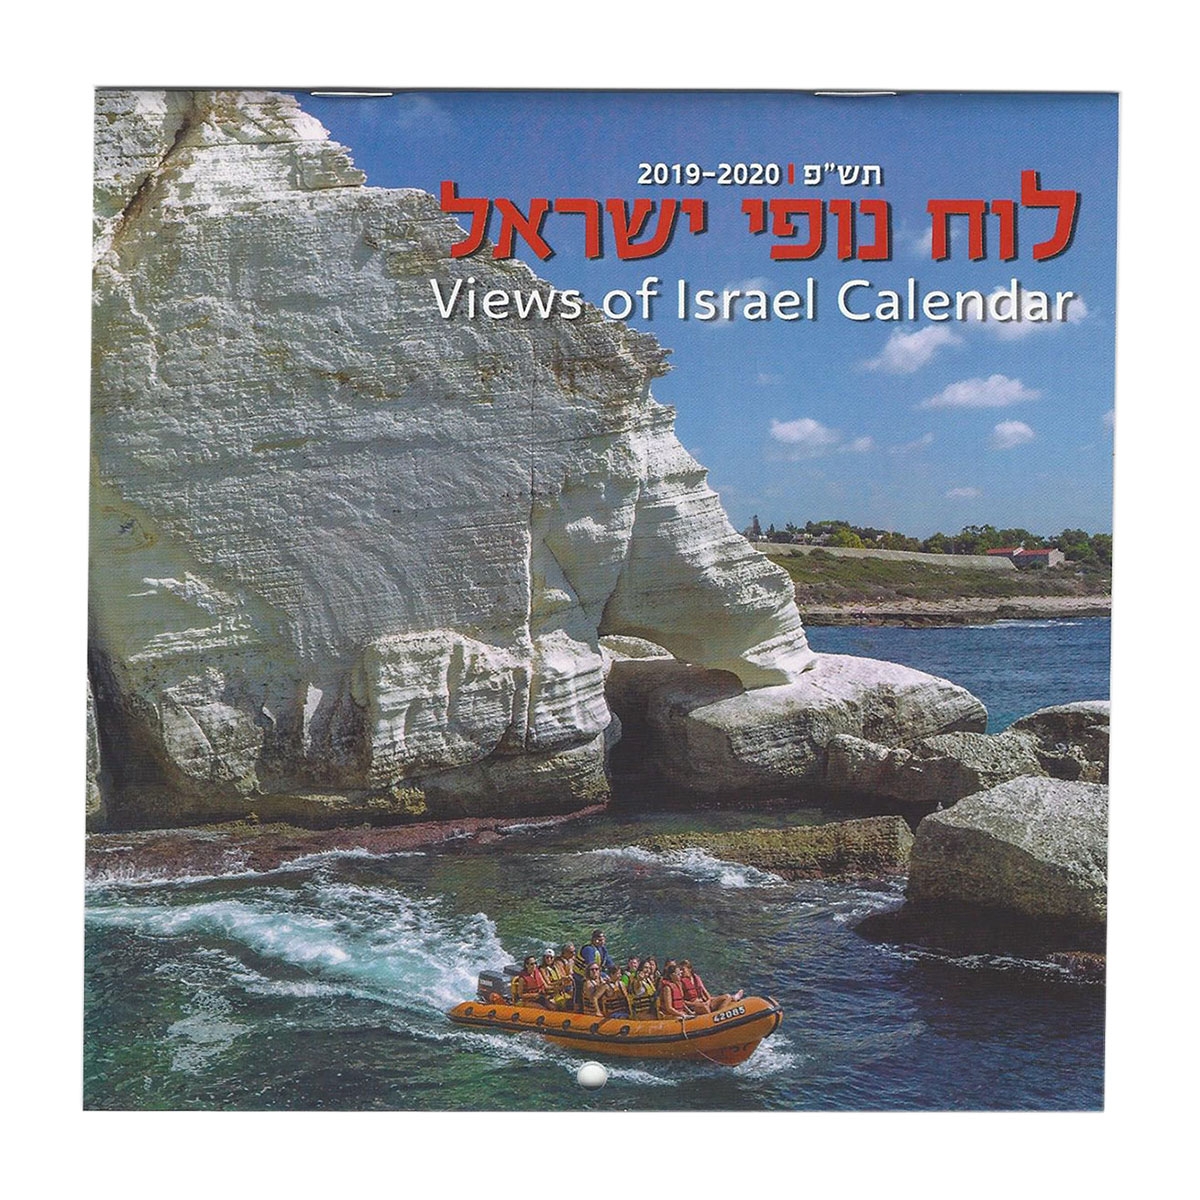 Views of Israel Compact Picture Wall Calendar 2019-20 - 1